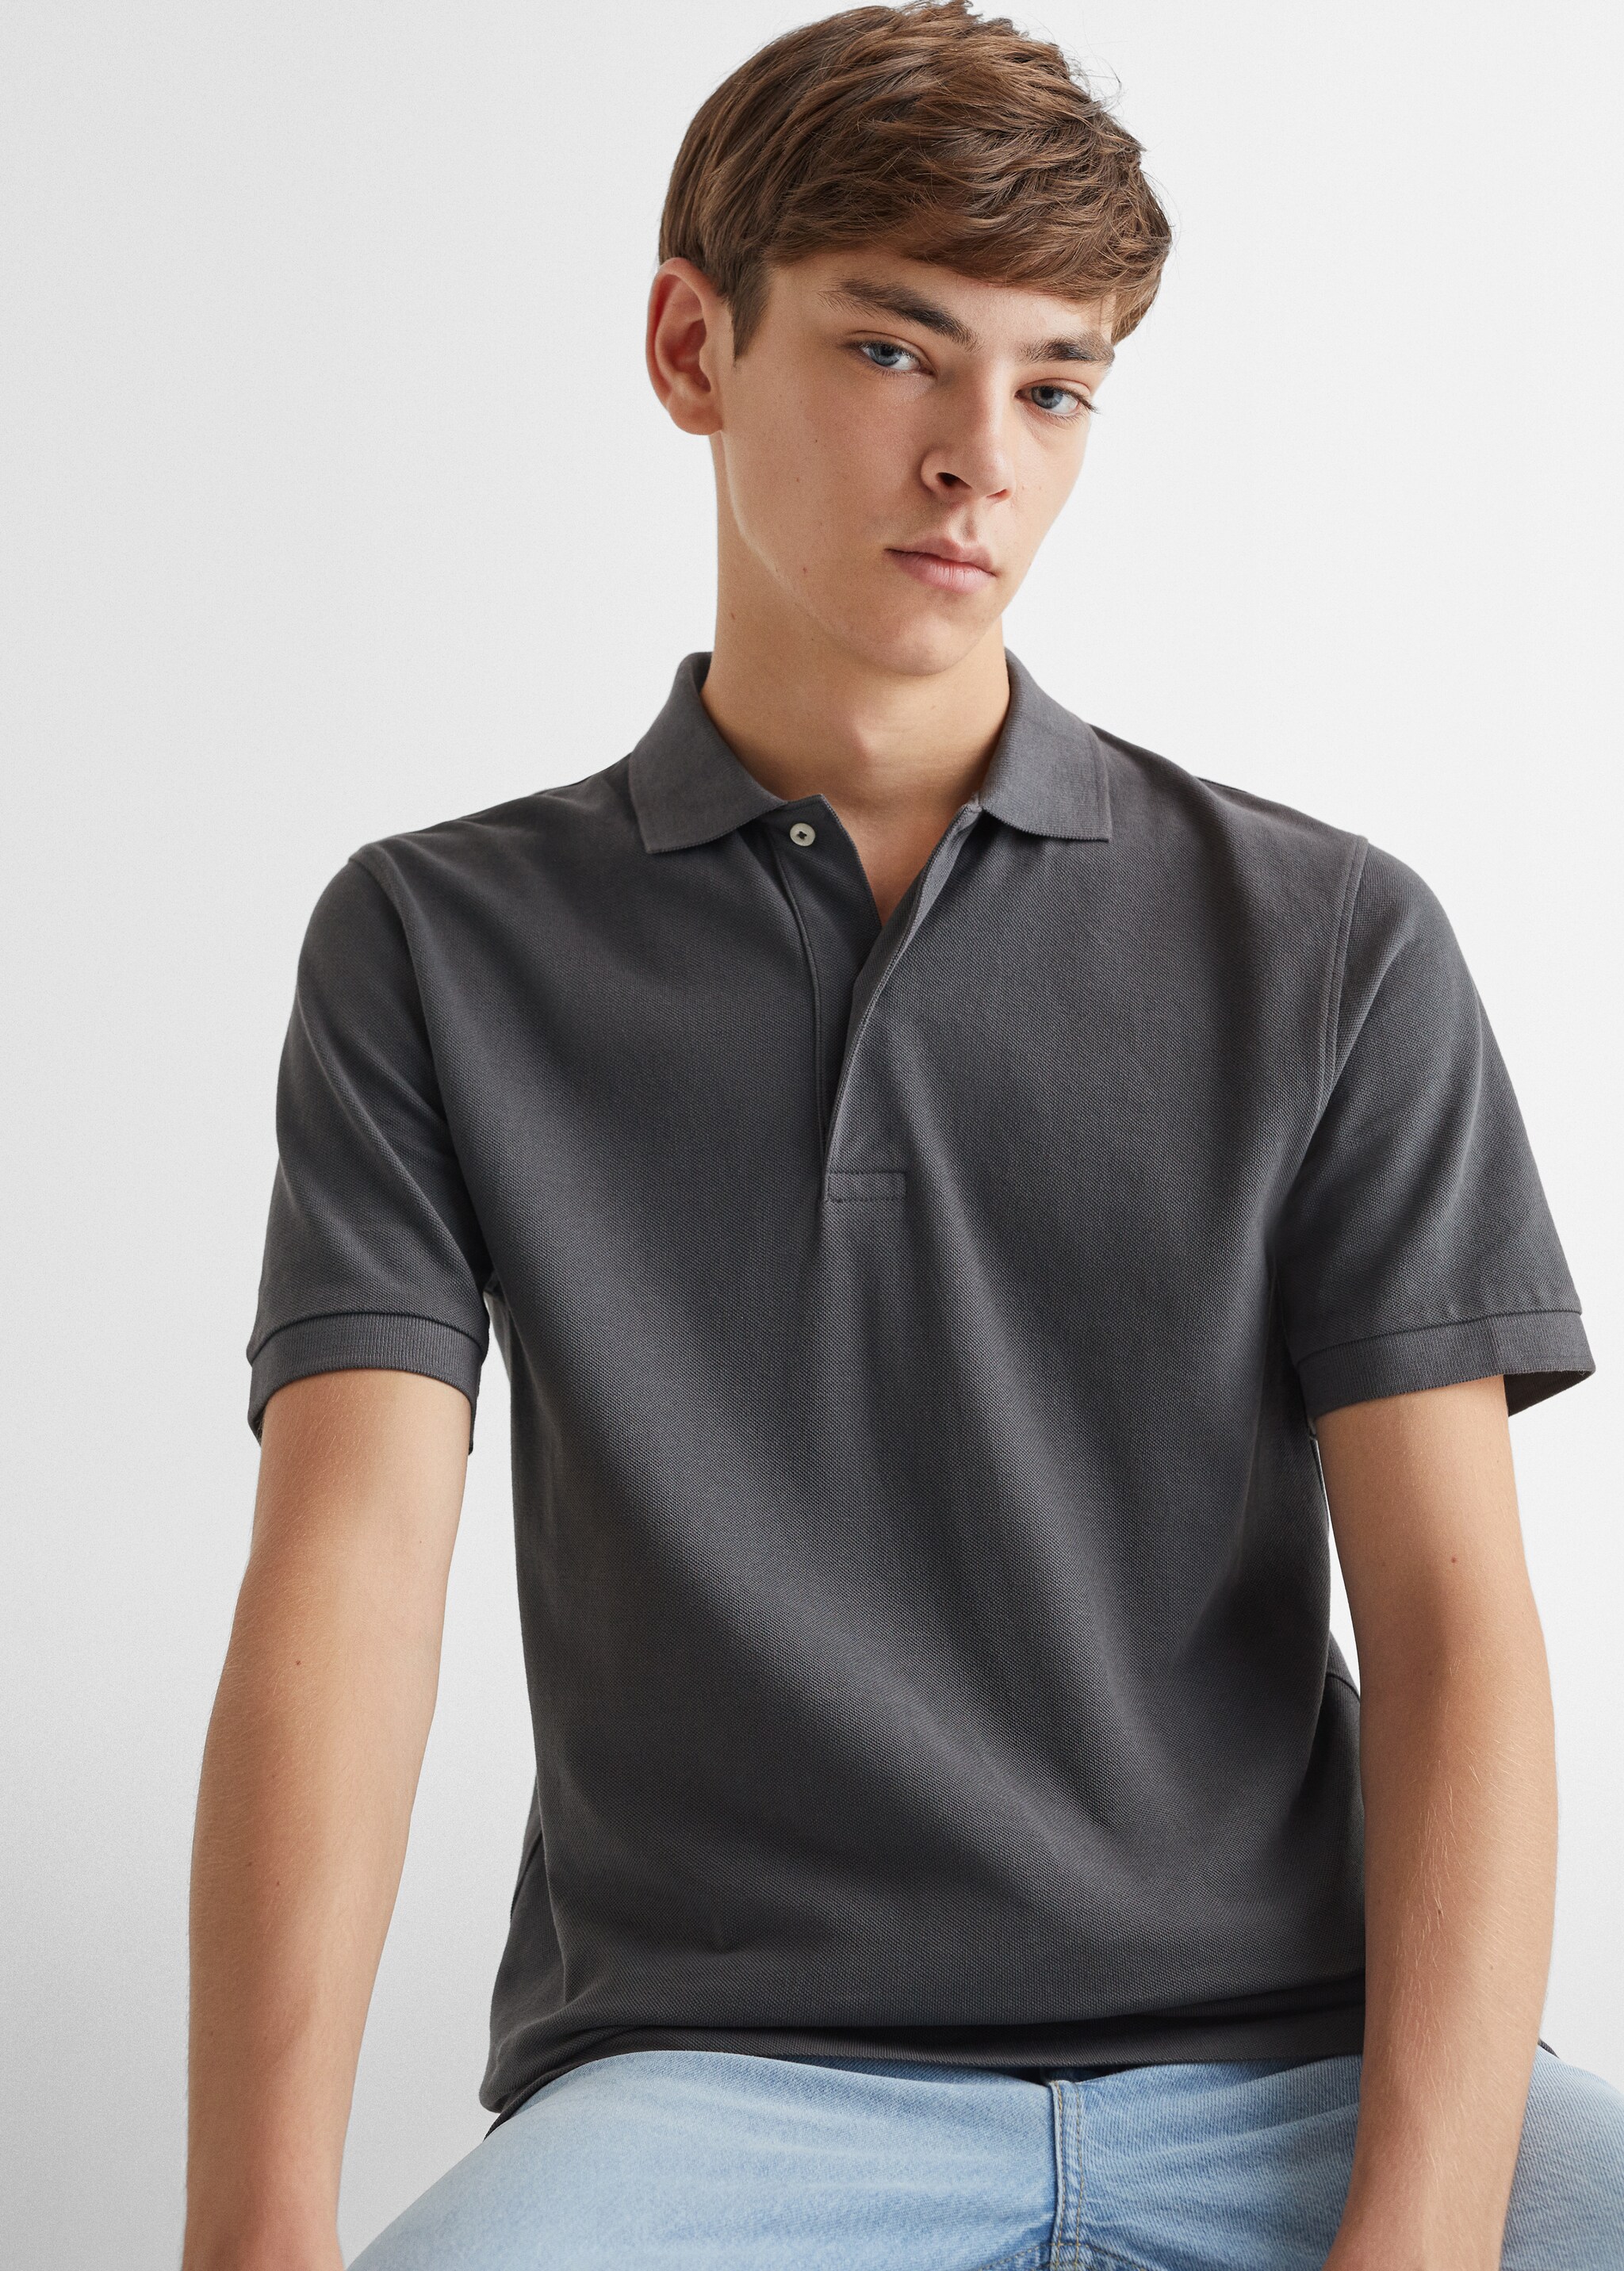 100% cotton polo shirt - Details of the article 2